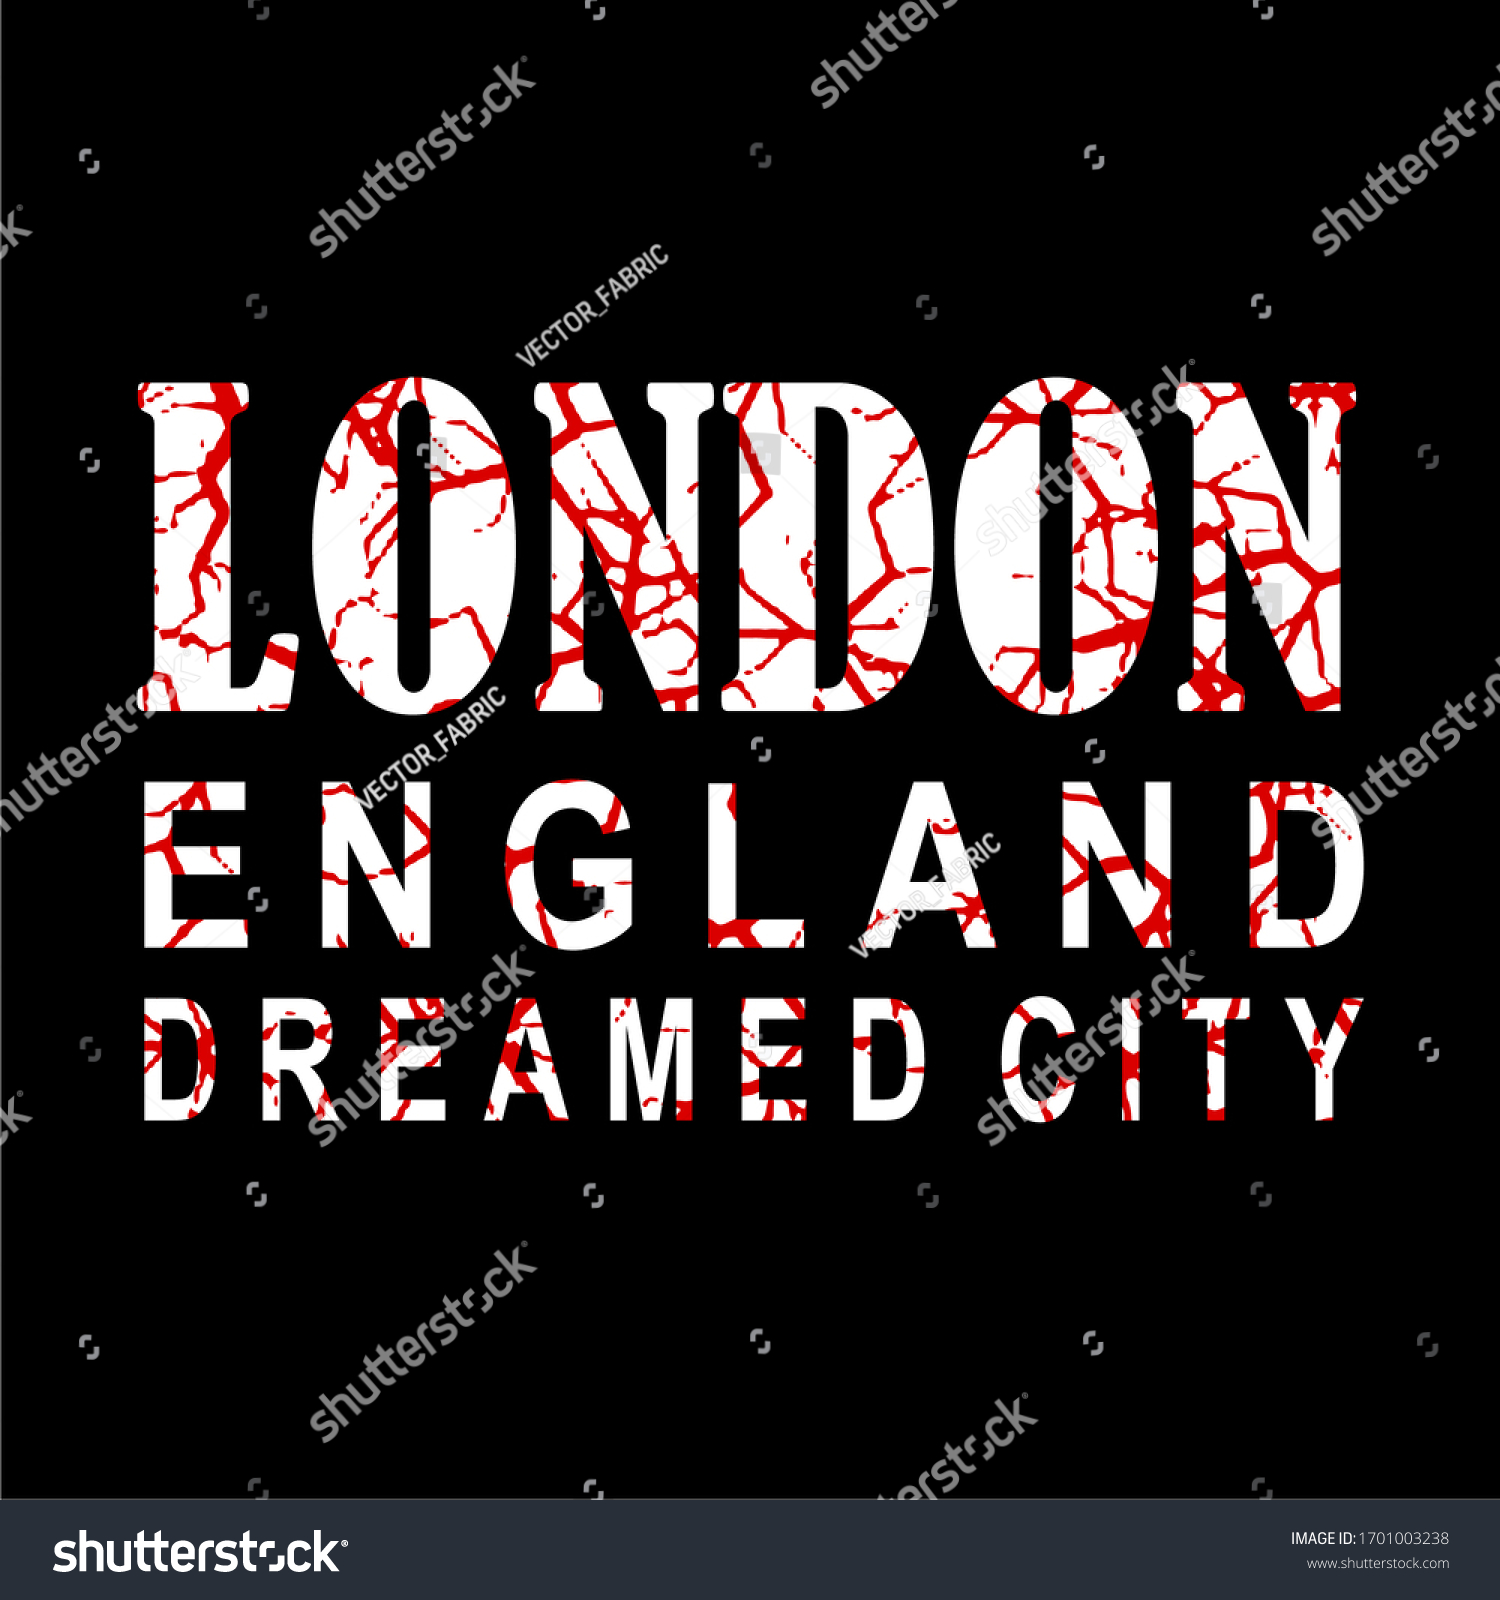 London England Dreamed City Words Design Stock Vector (Royalty Free ...